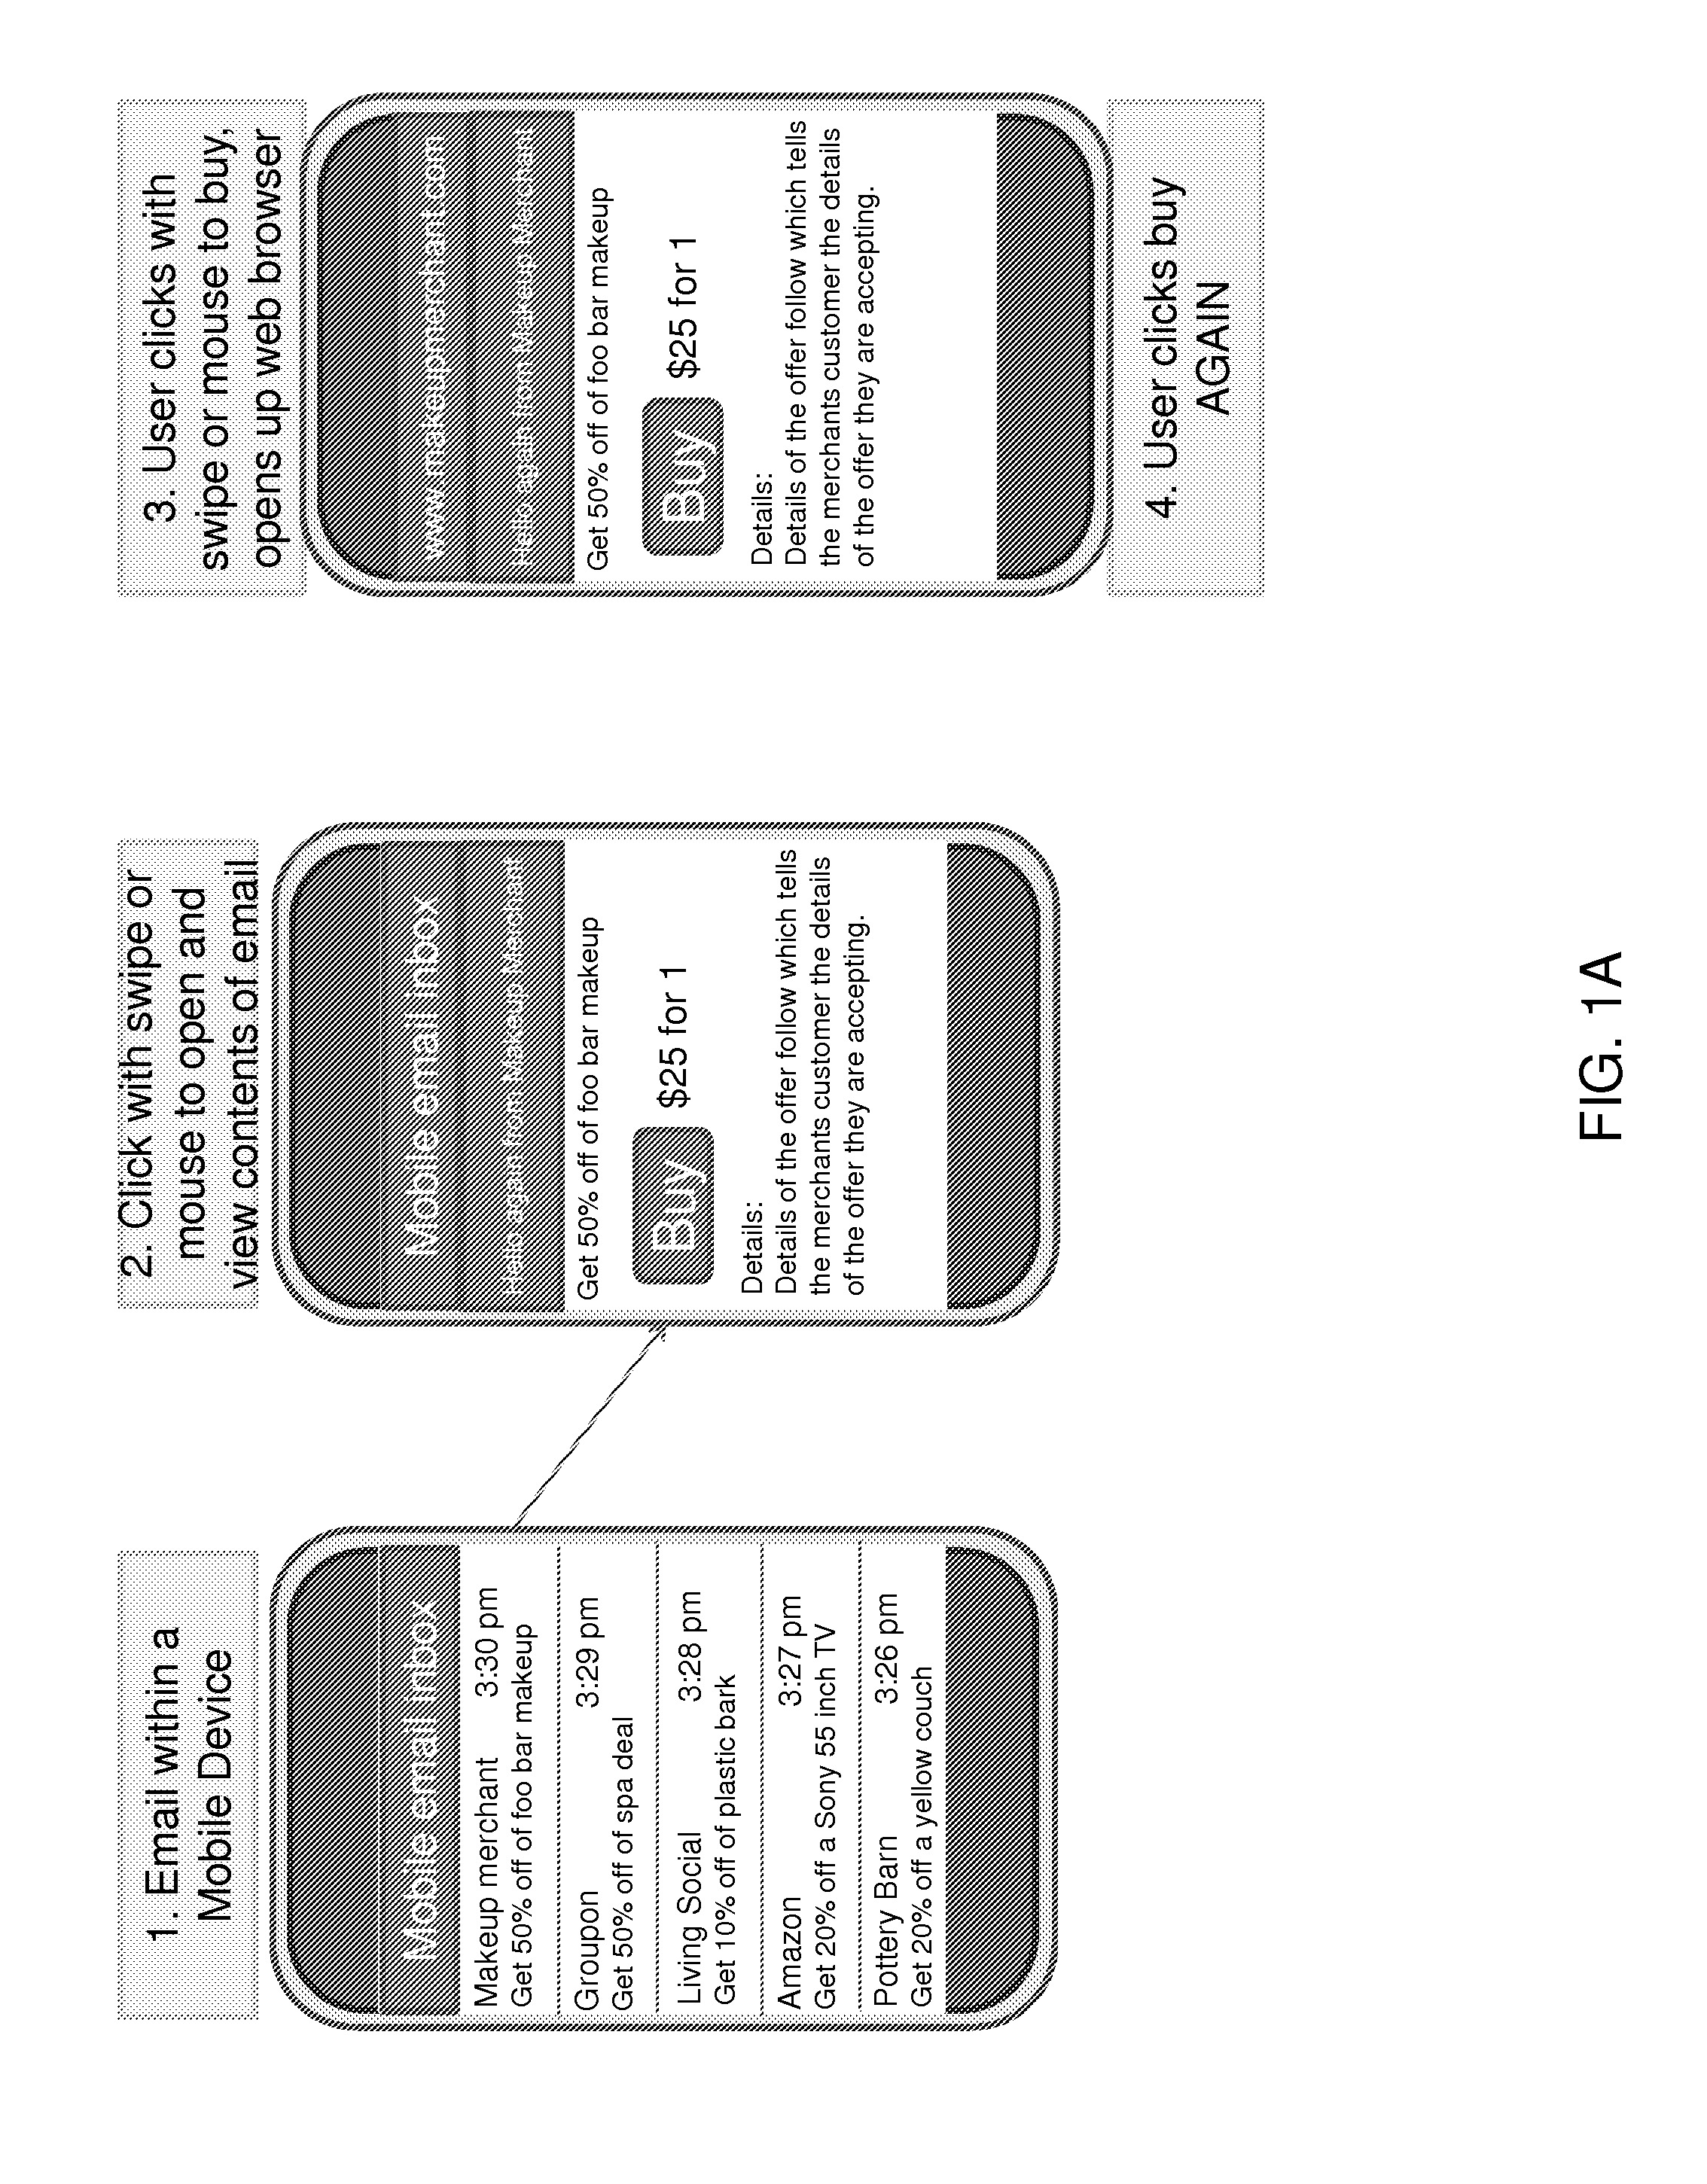 System, method, and computer program product for Data Entry Free electronic purchasing